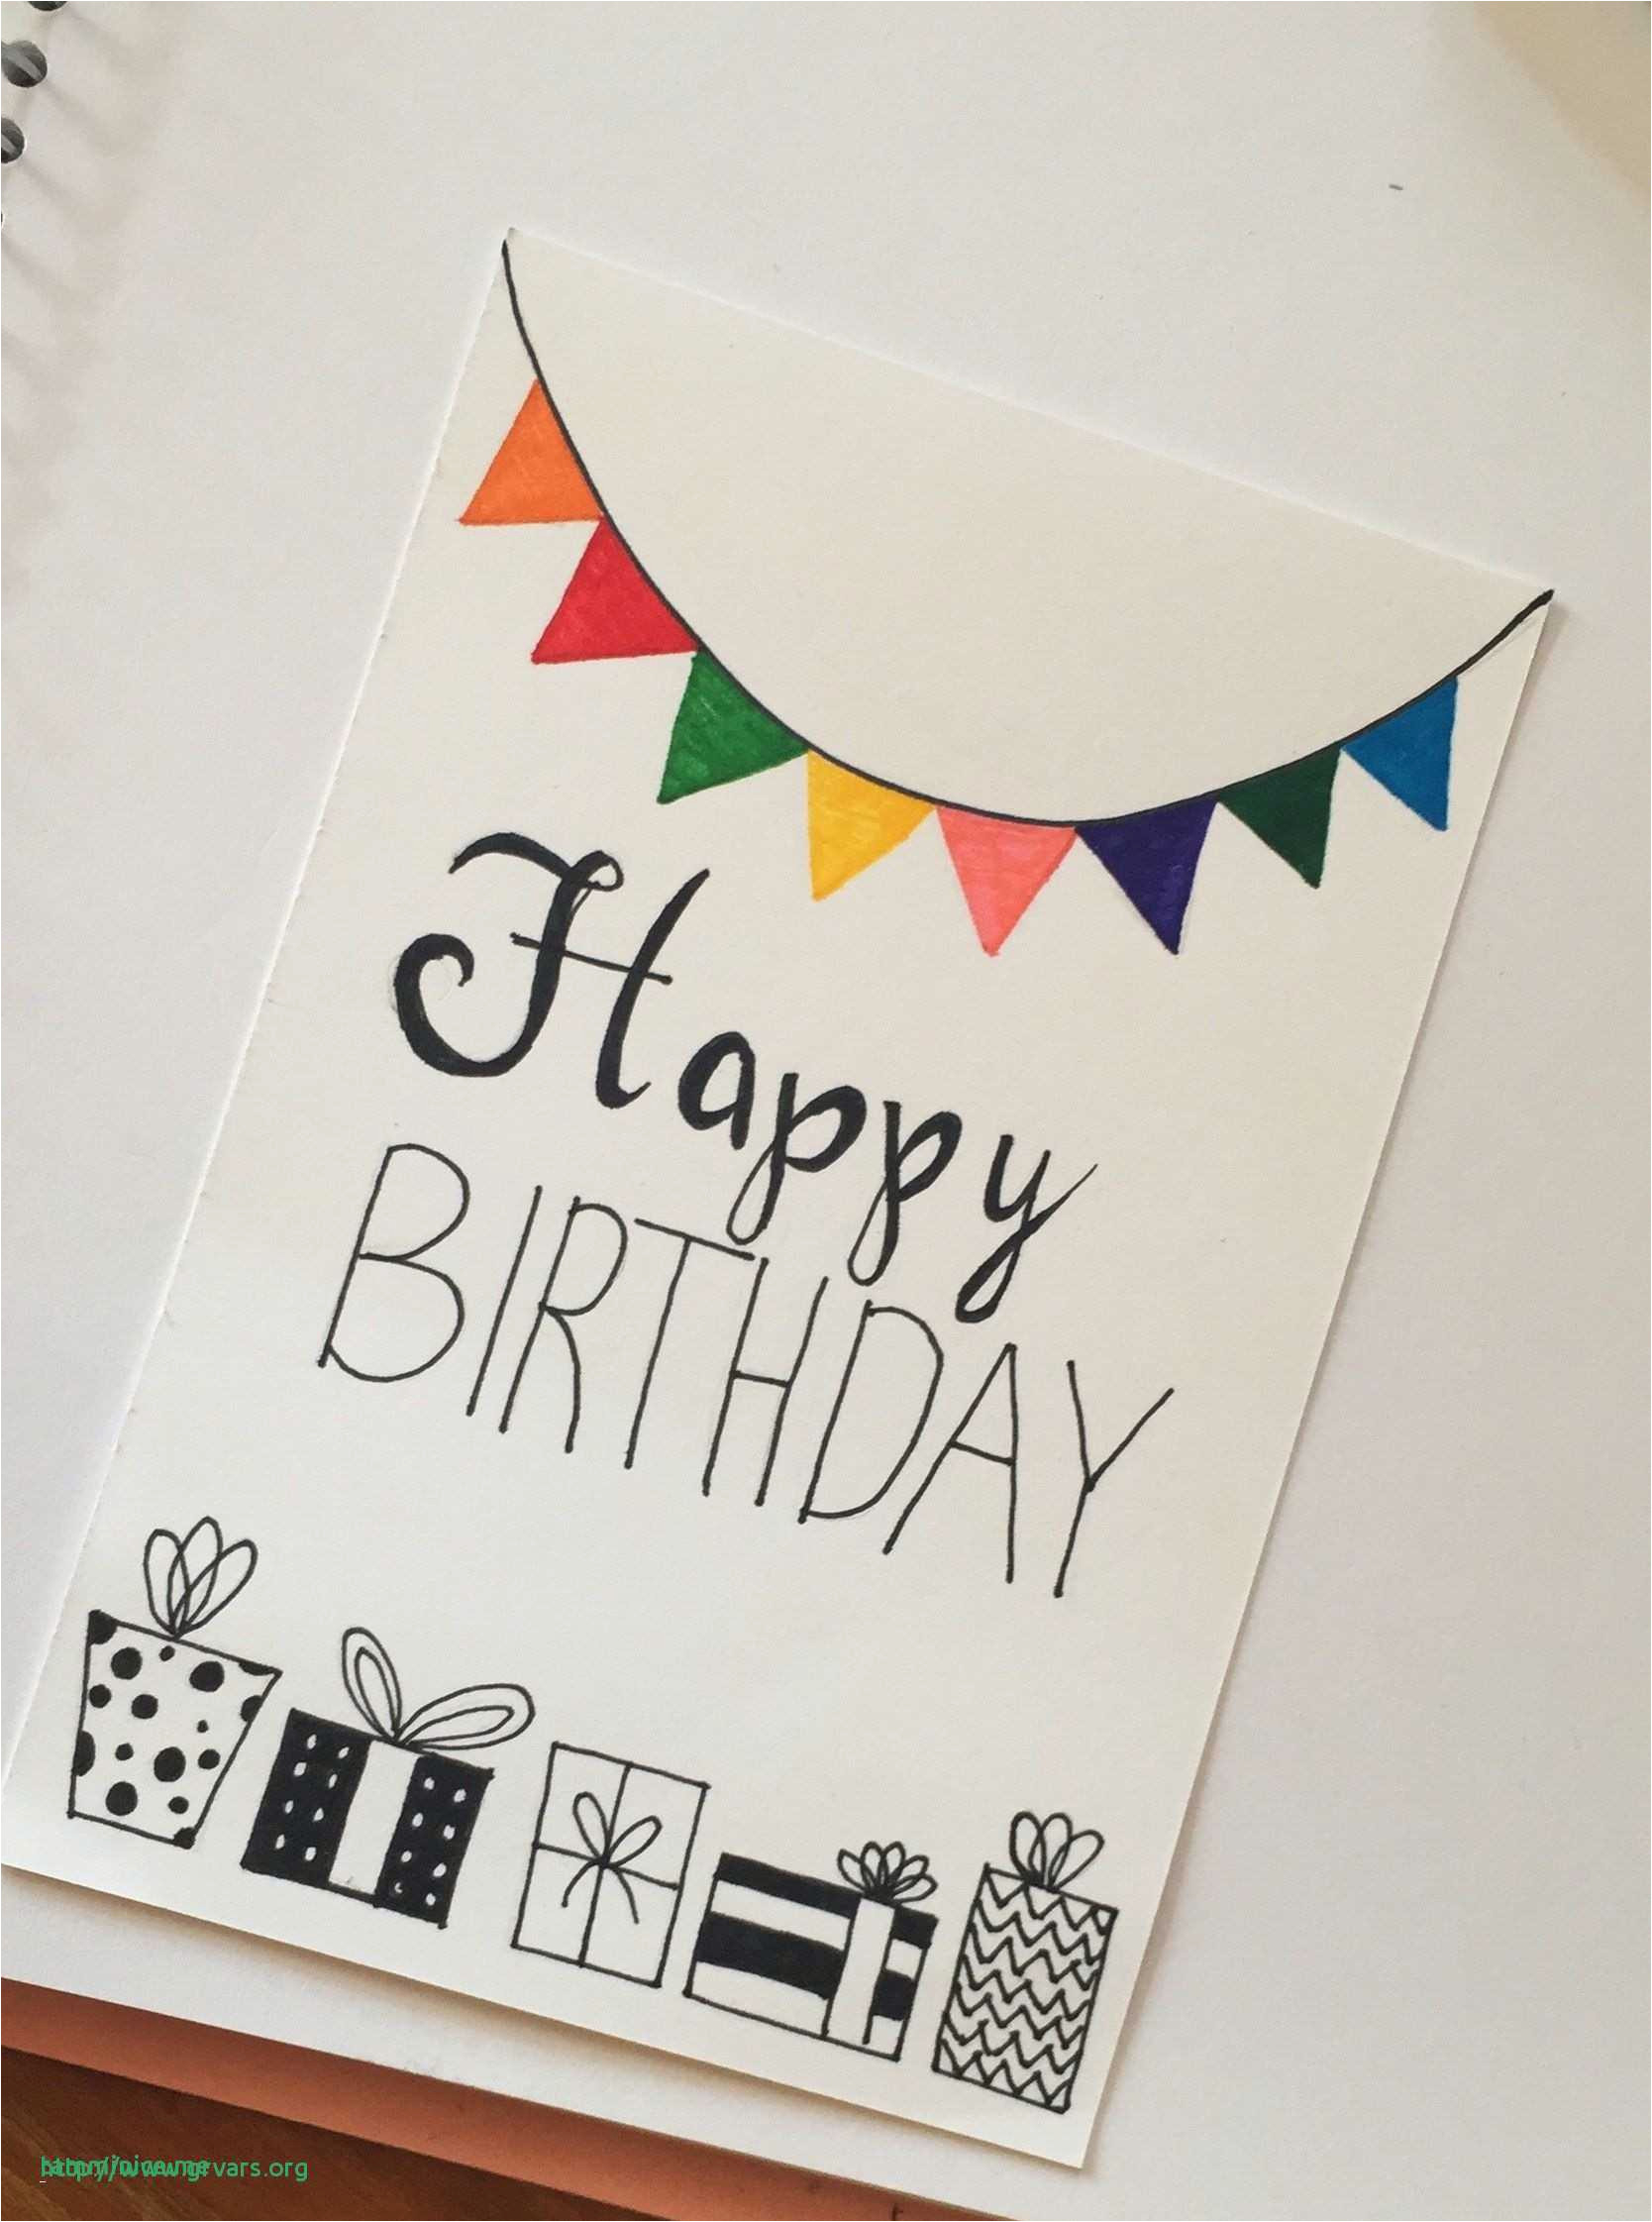 Ideas To Make Birthday Cards How To Make Diy Birthday Cards For Best Friend Simple Handmade